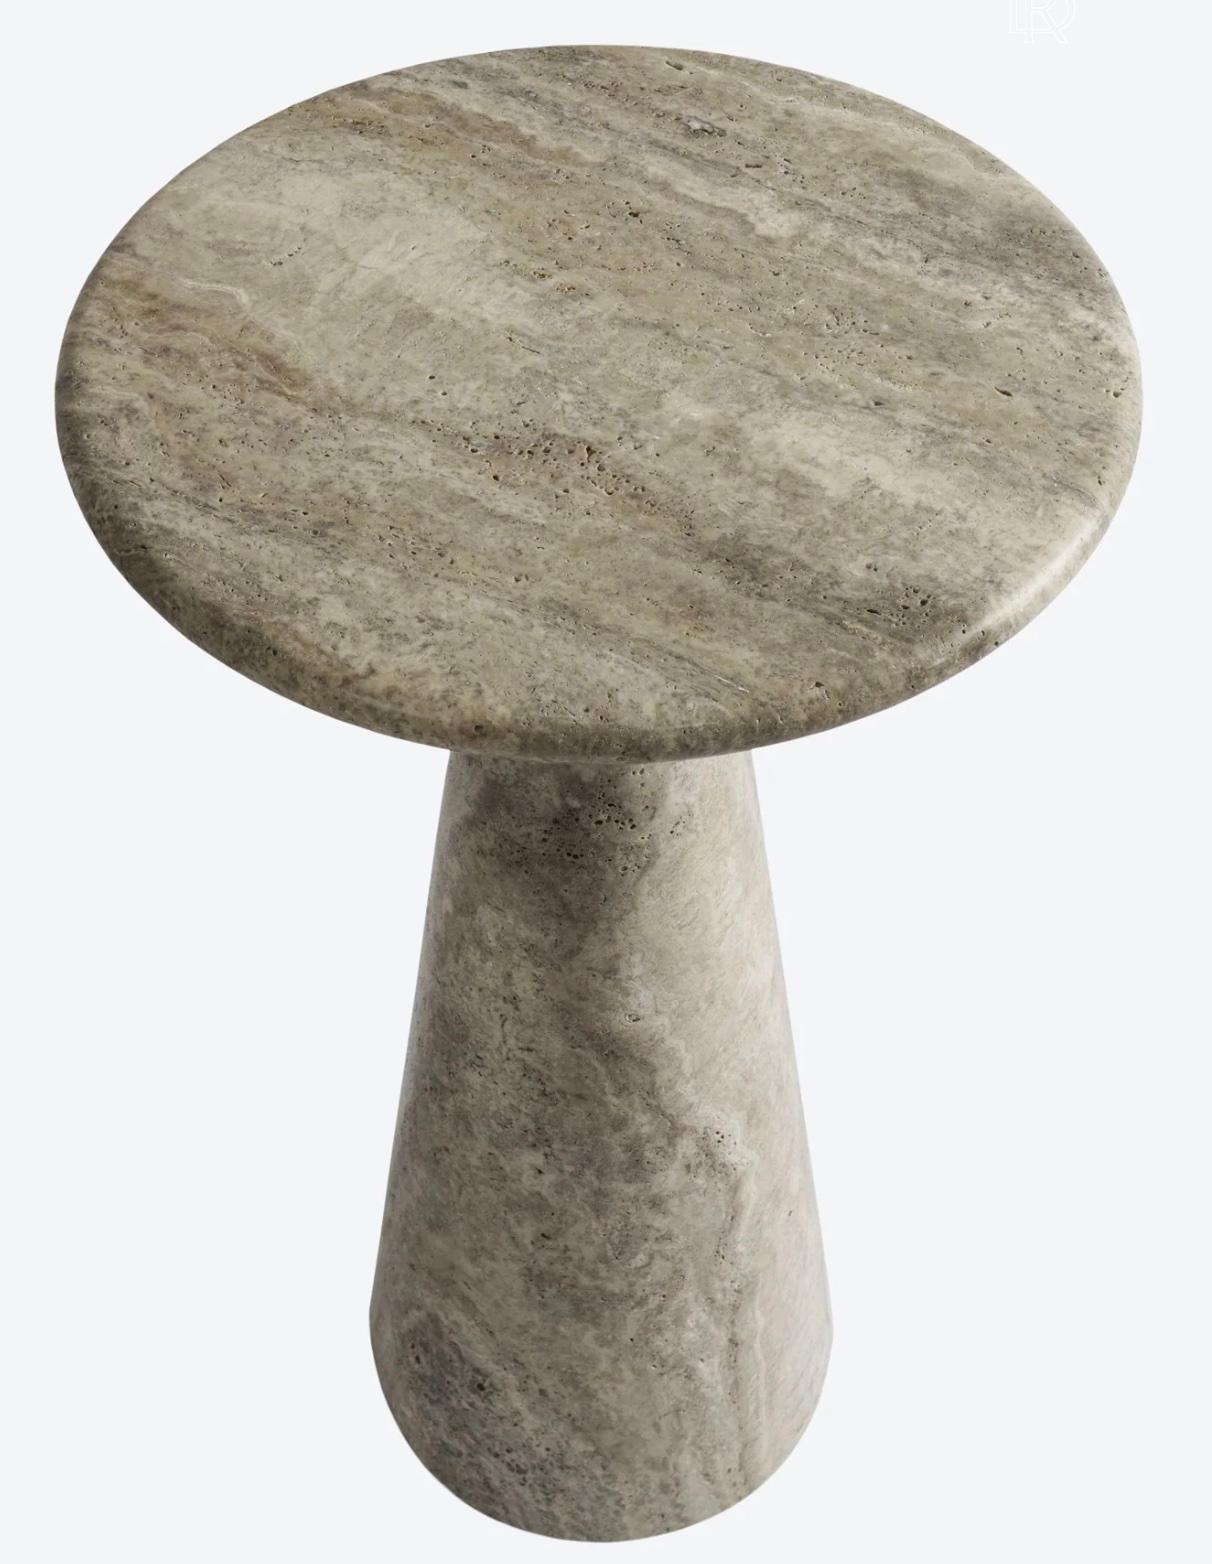 Our most versatile side table made of silver travertine. A simple elegant silhouette carved from a solid block of stone. This occasional stone table can be used virtually anywhere - next to a sofa, chair, bed, or bath. Sold individually, but can